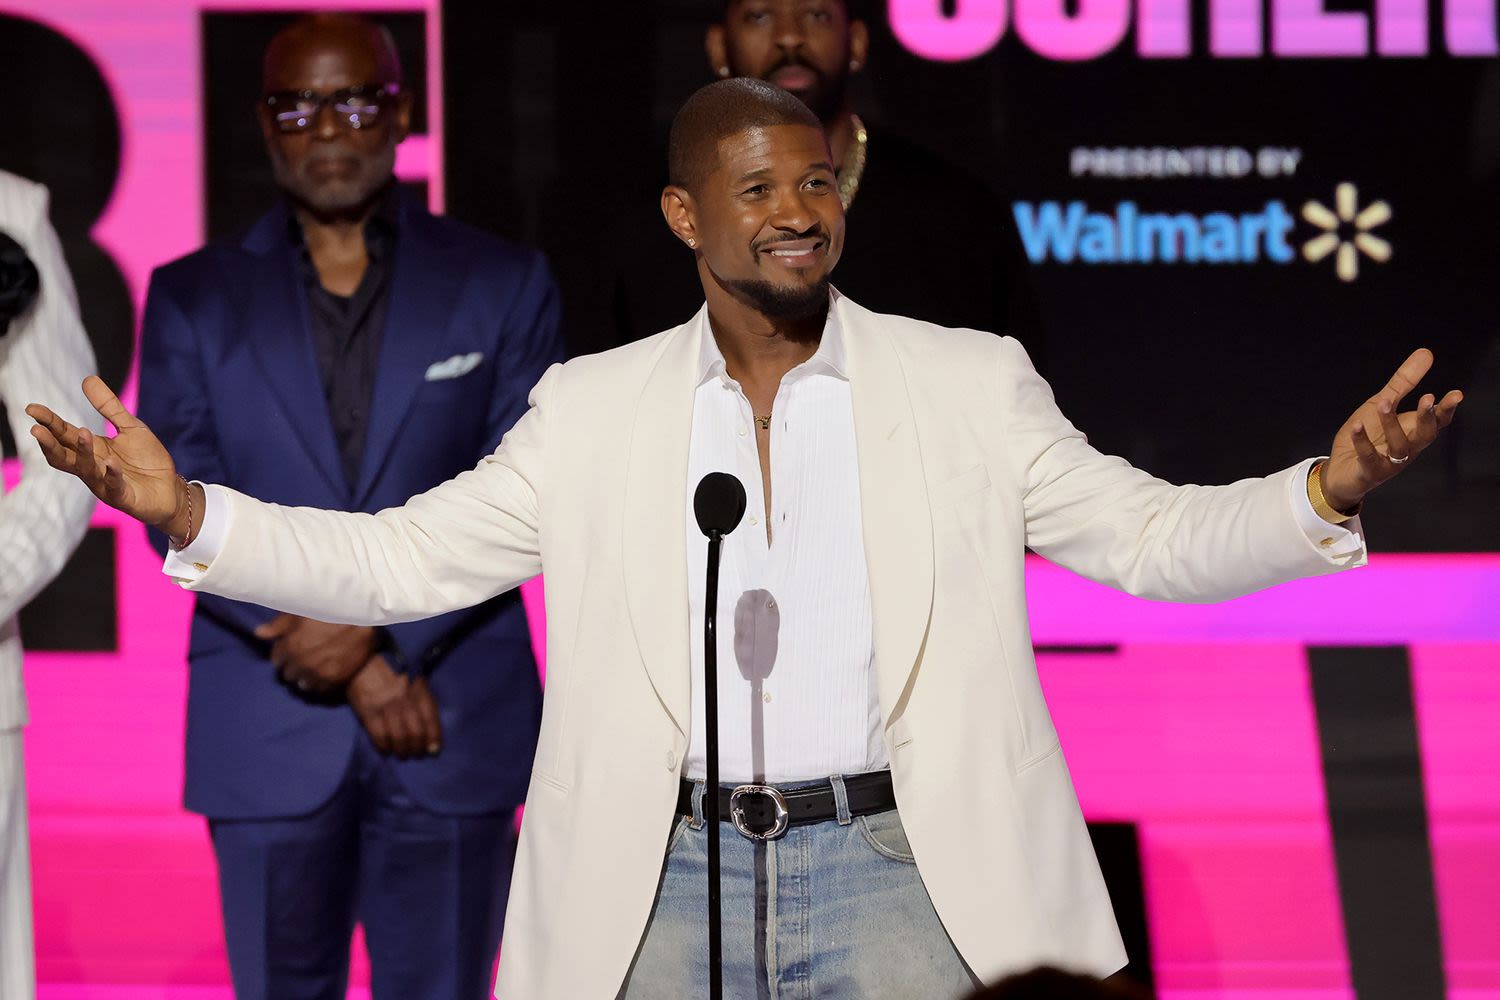 BET Apologizes to Usher for ‘Audio Malfunction’ That Muted Parts of His Lifetime Achievement Award Speech